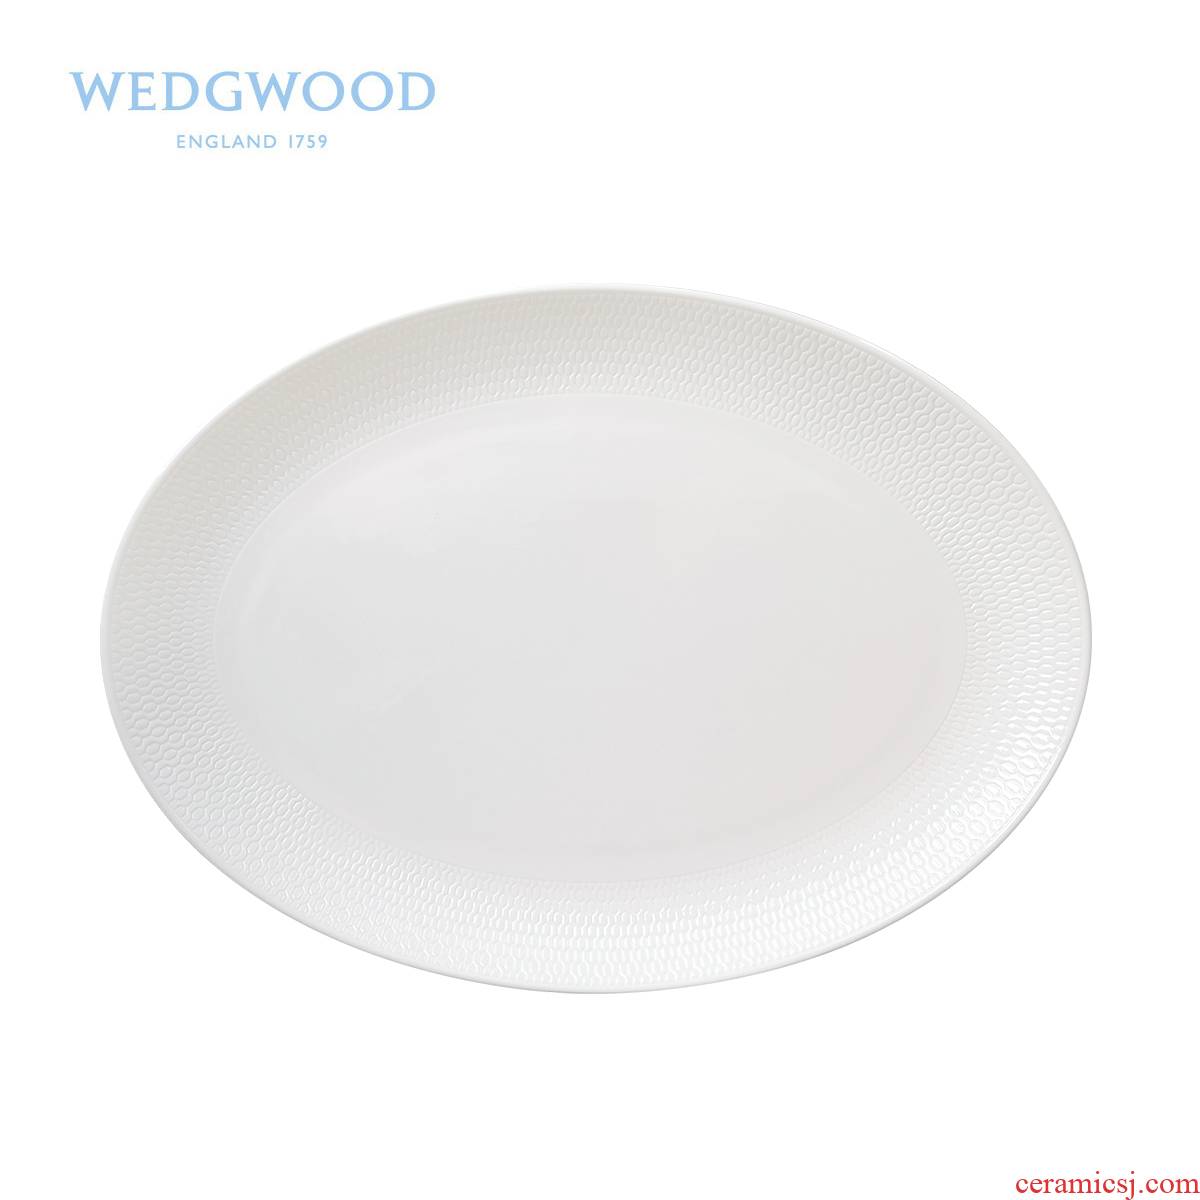 Wedgwood waterford Wedgwood Gio honeycomb series ipads porcelain 36 cm fish plate pure color western - style food vegetable salad plate